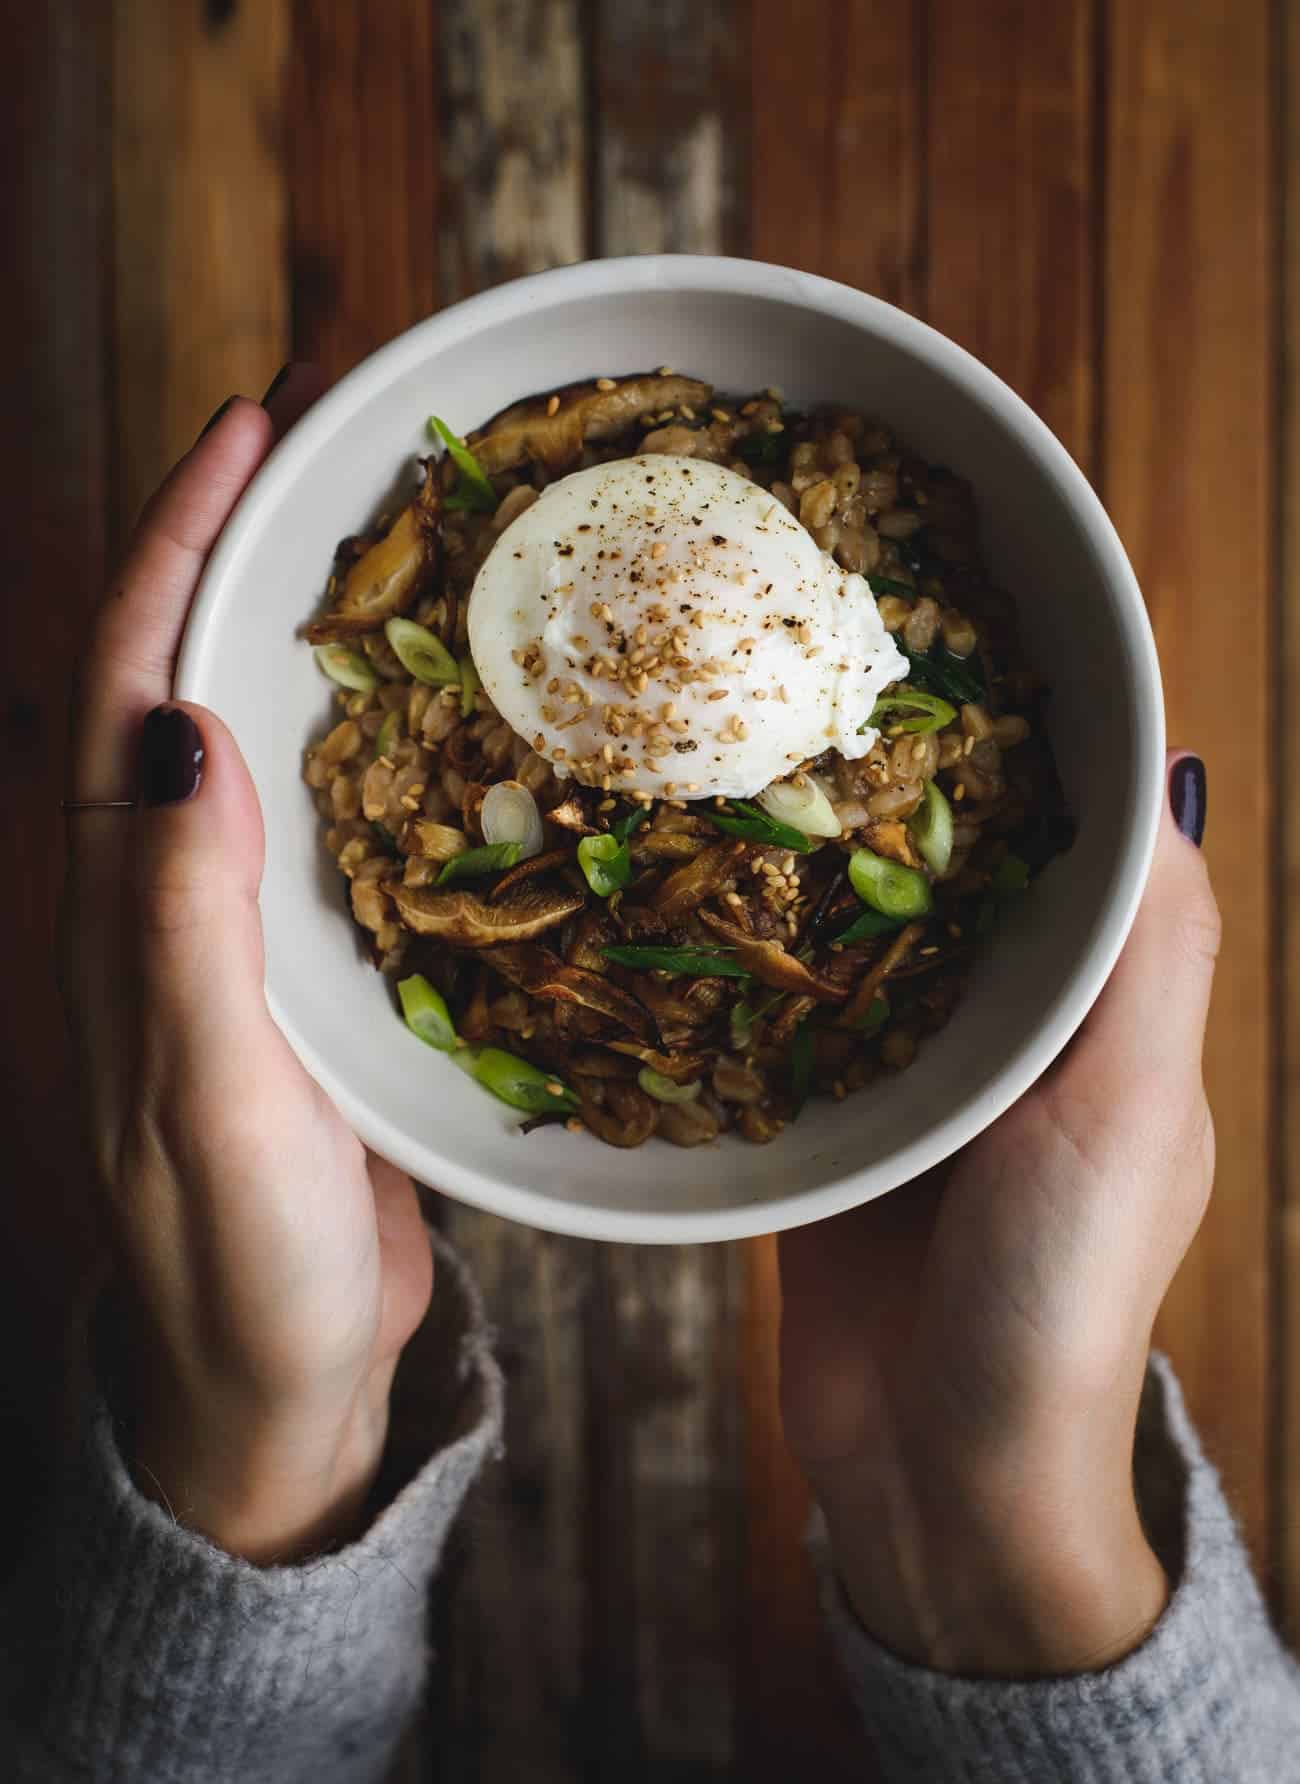 Woman's hands holding a bowl of savory porridge with a poached egg